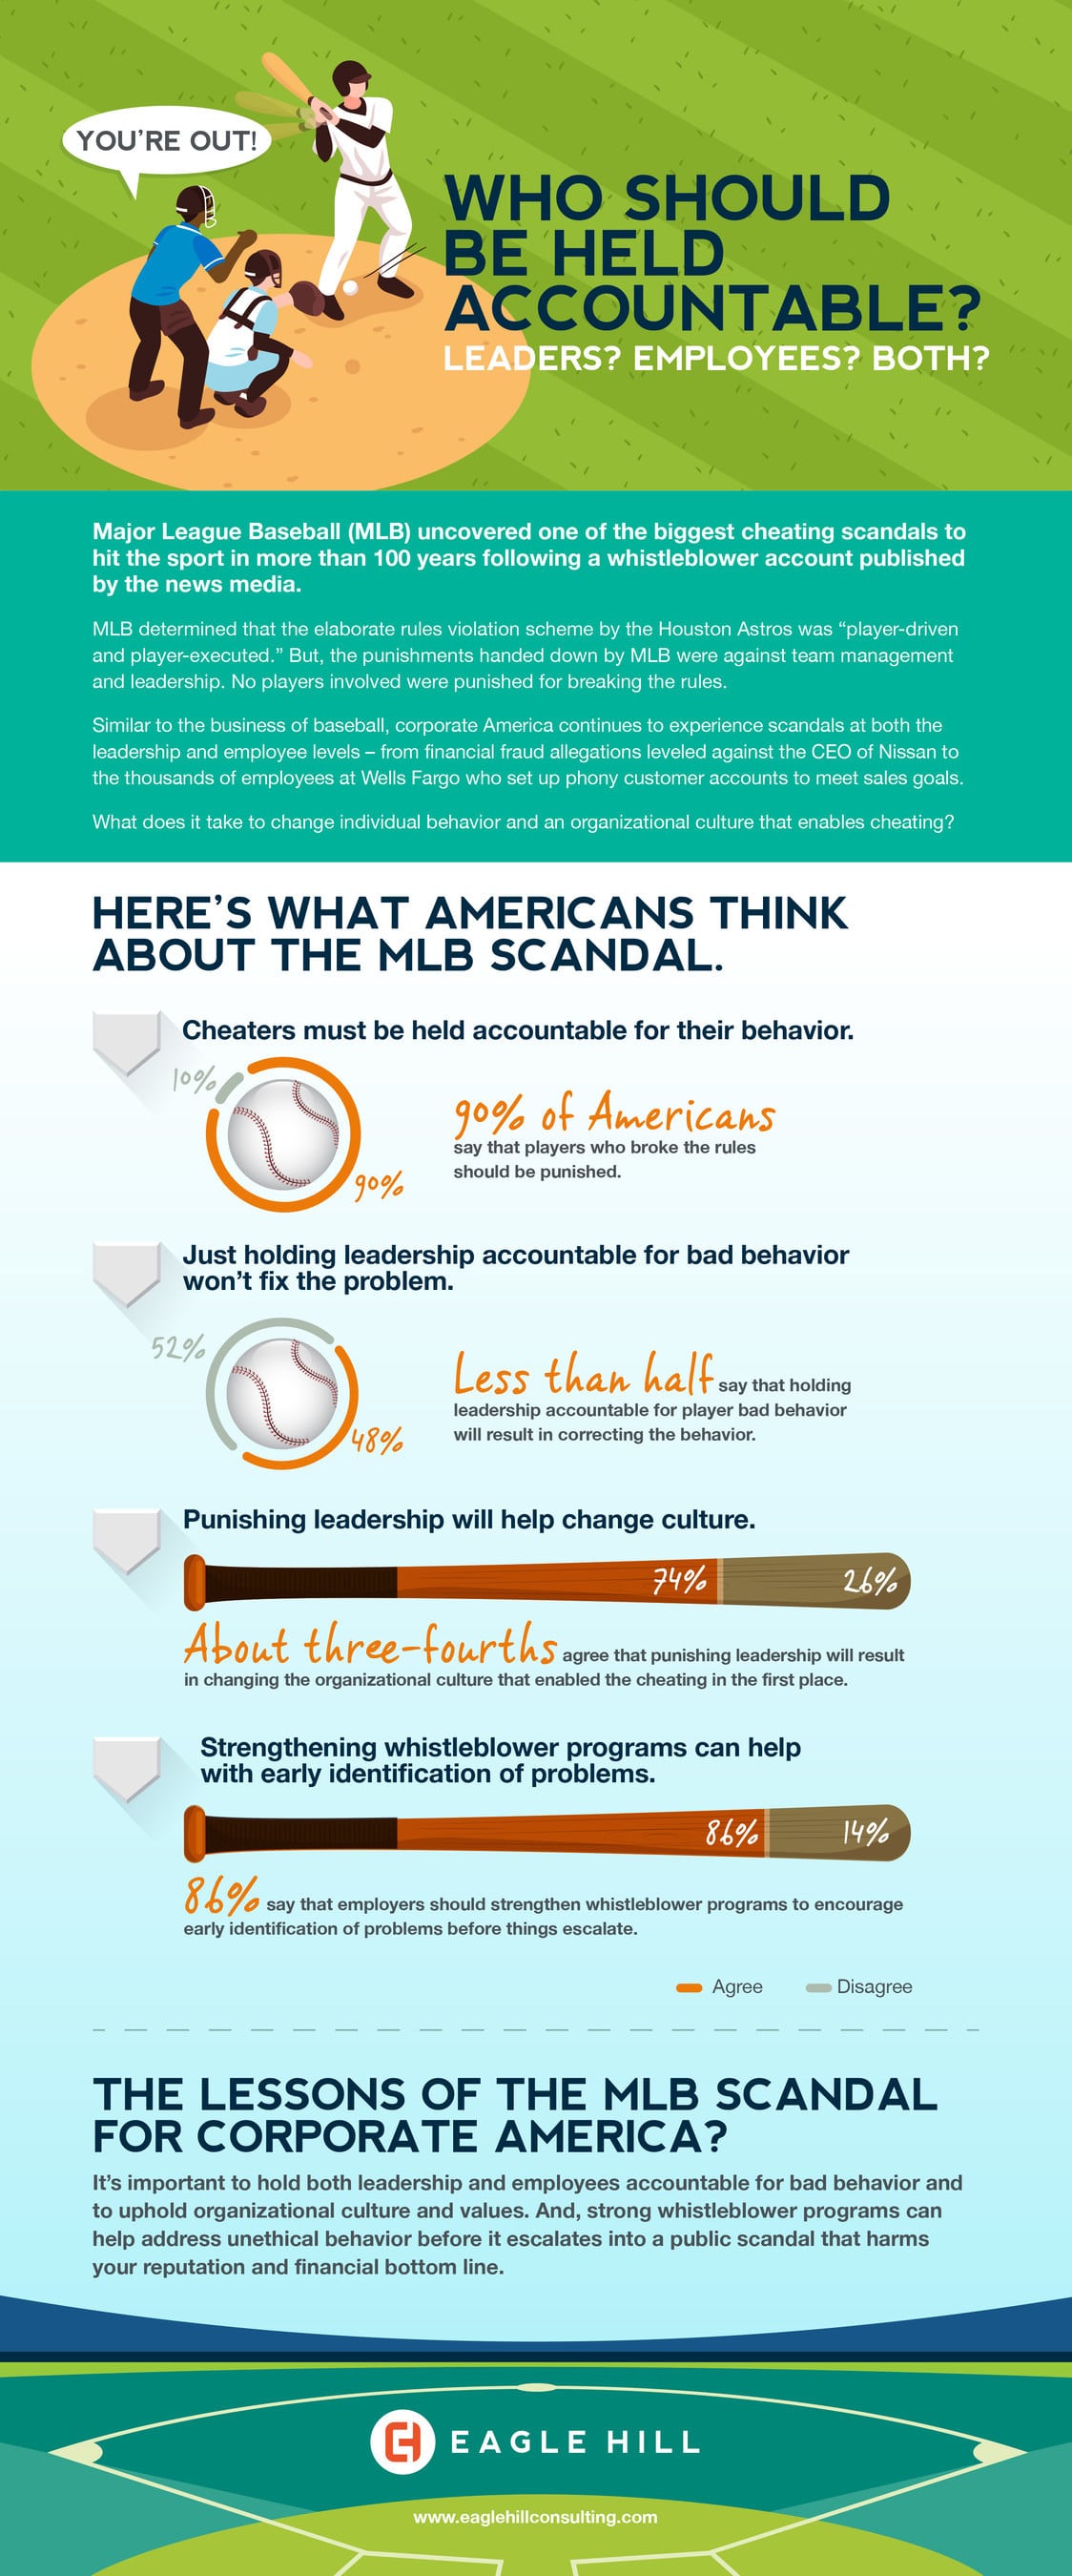 9 in 10 say Houston Astros players in cheating scandal should pay the price